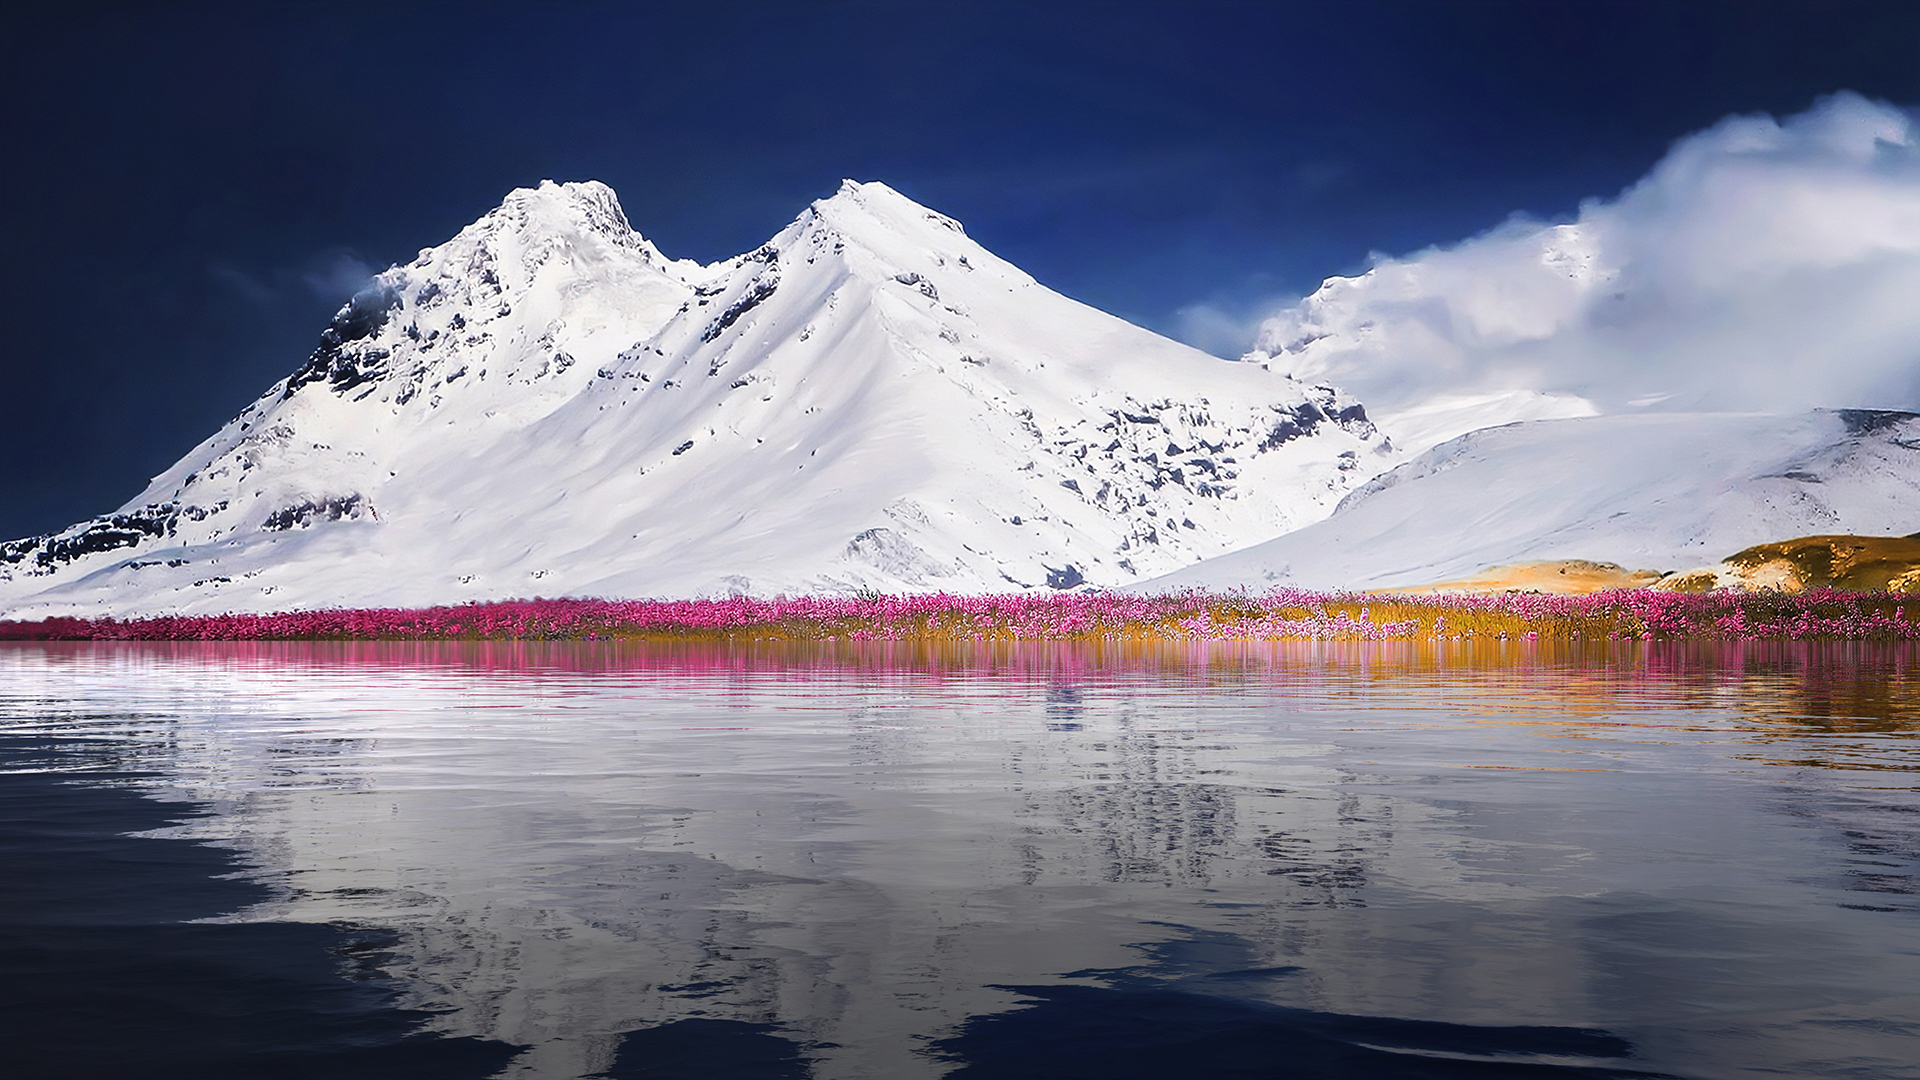 General 1920x1080 mountains snow water landscape snowy mountain